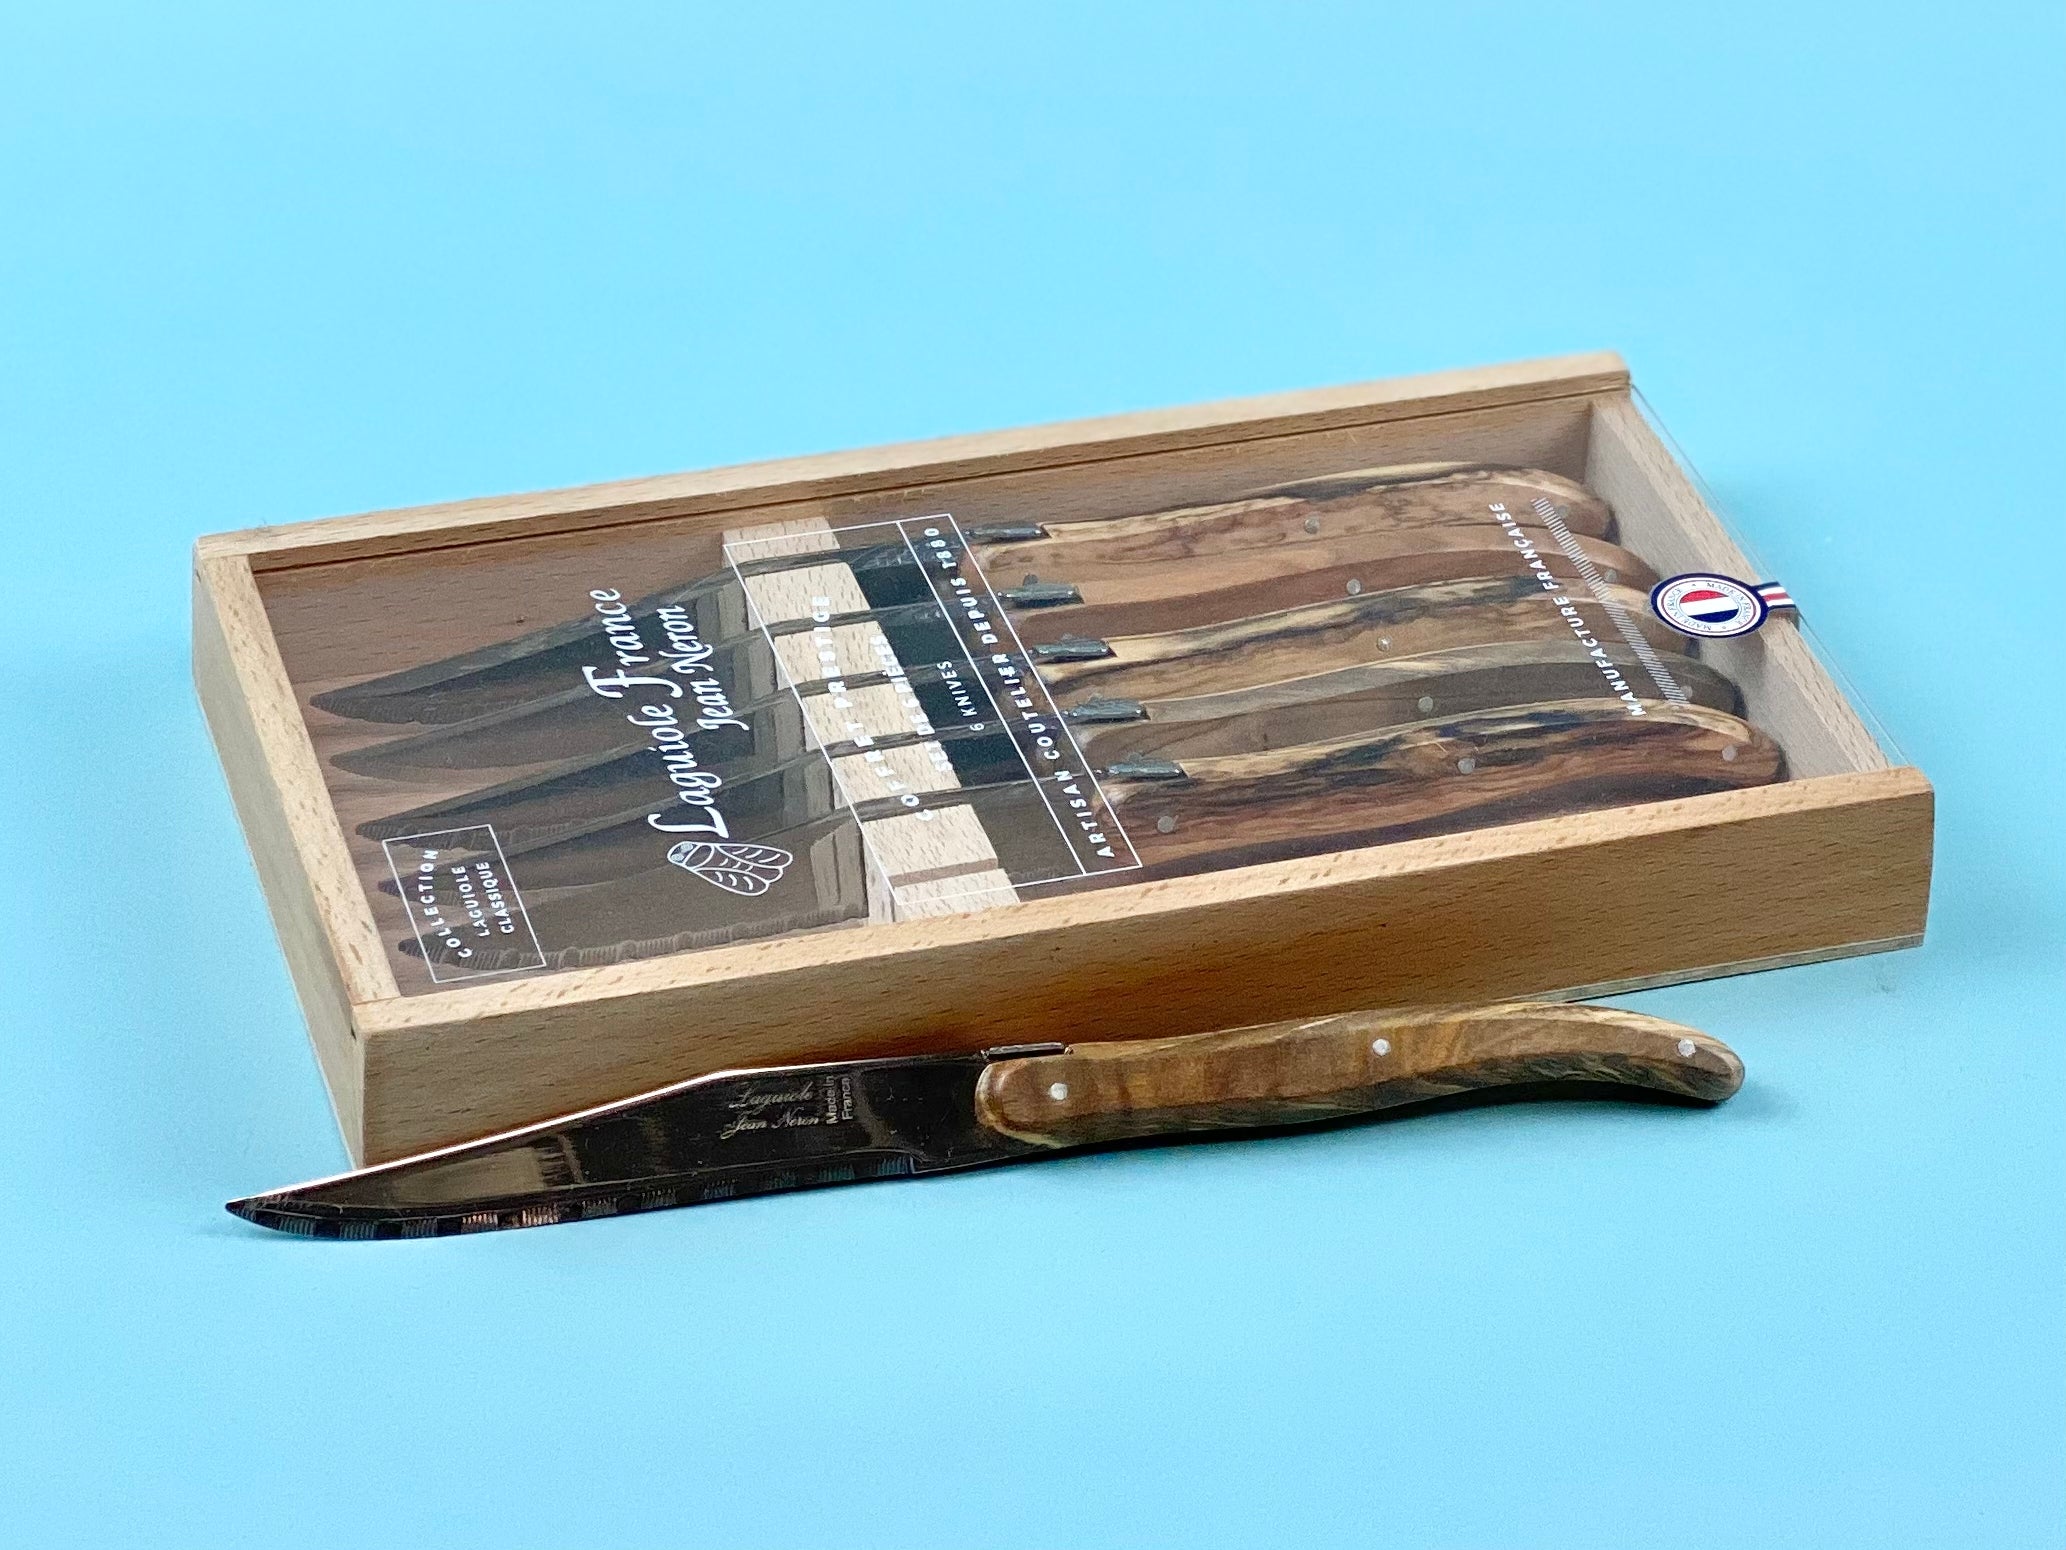 Laguiole Olivewood Knives in Wooden Box with Acrylic Lid (Set of 6) Cutlery Laguiole Brand_Laguiole Flatware Sets Kitchen_Dinnerware Kitchen_Kitchenware Laguiole 790060590OLAL